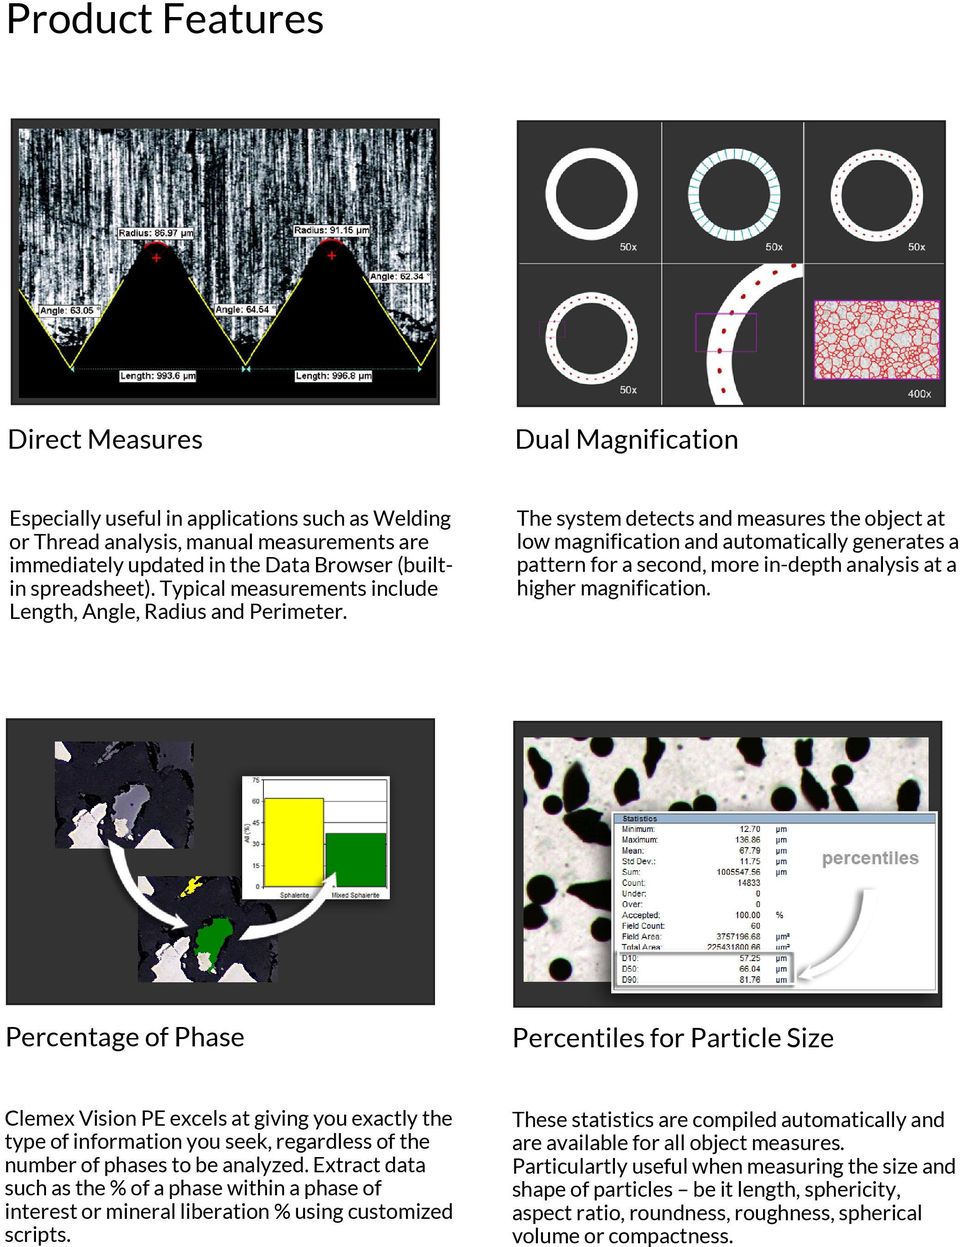 The system detects and measures the object at low magnification and automatically generates a pattern for a second, more in-depth analysis at a higher magnification.